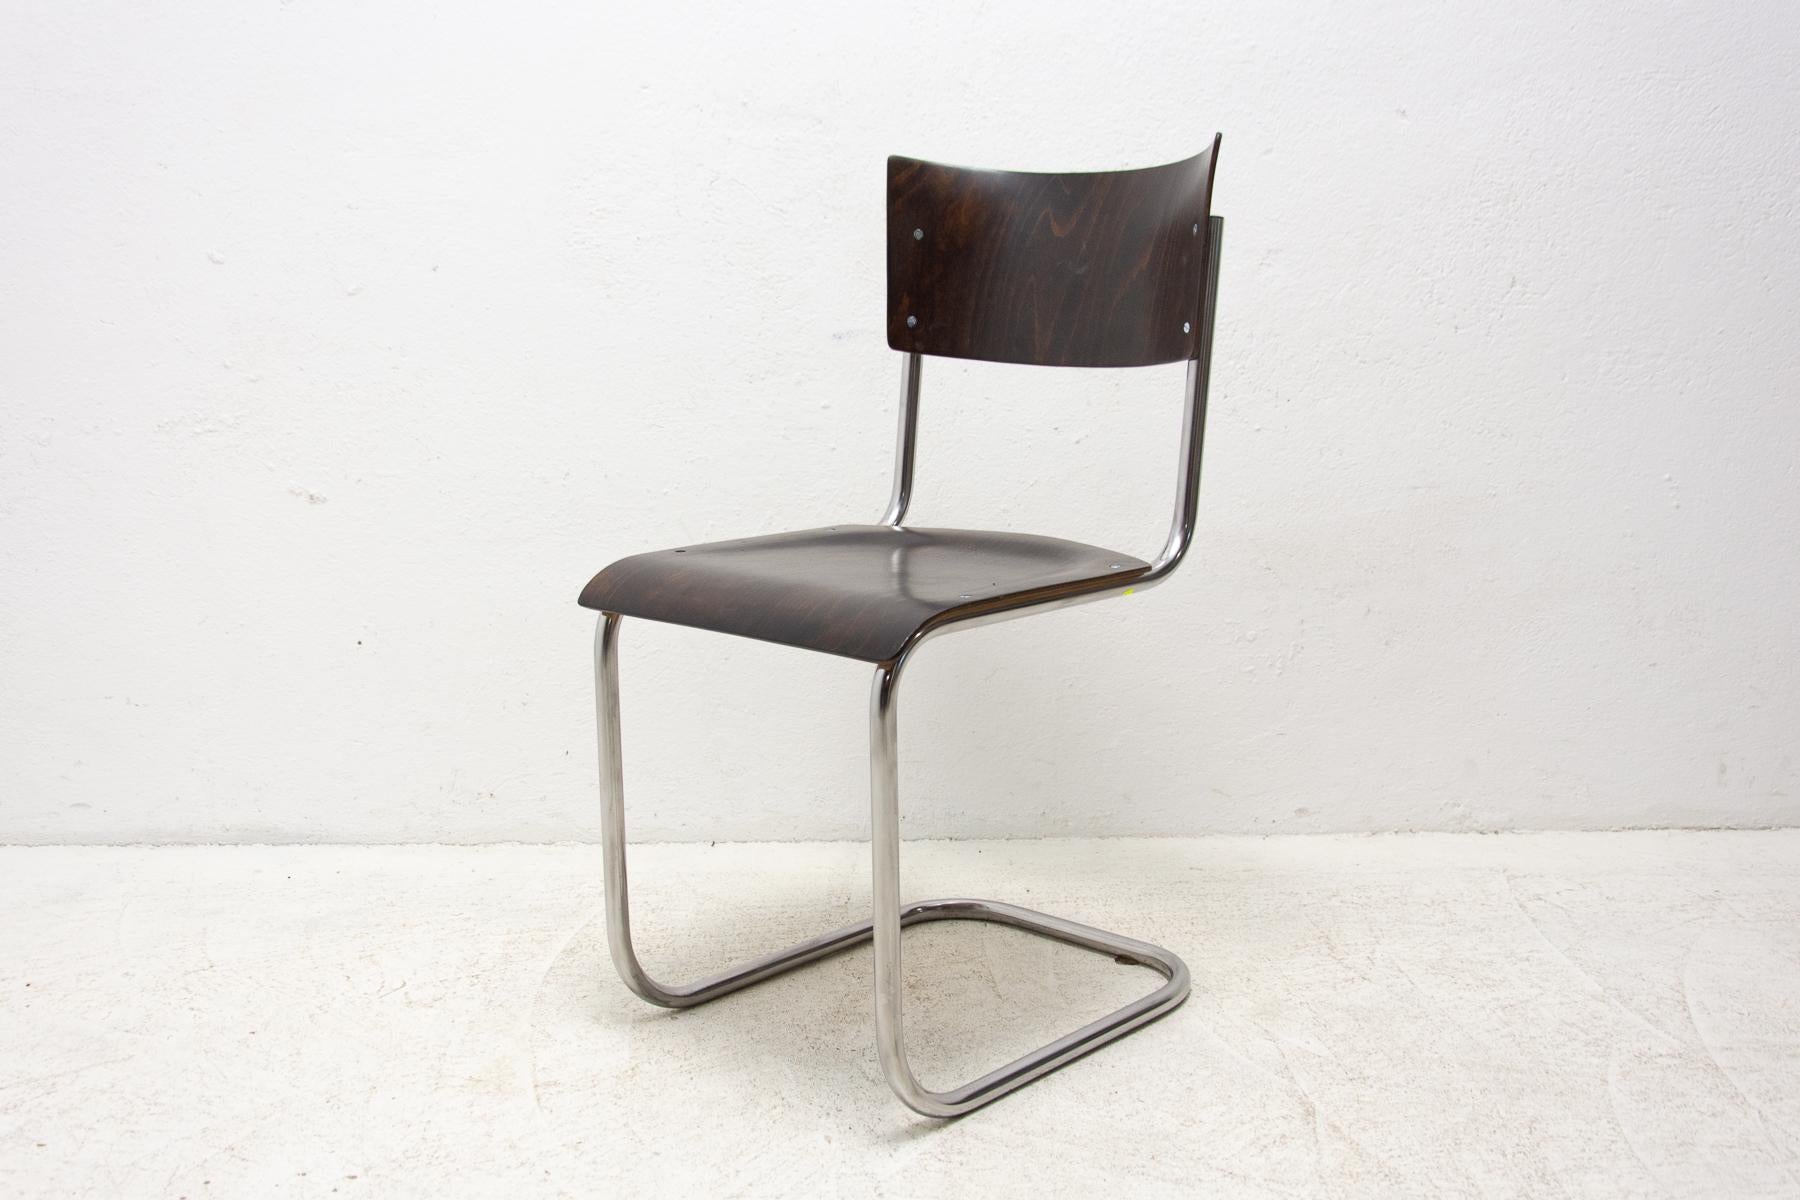 This chair is one of the most famous and was designed in the 1930s by Mart Stam and made in the former Czechoslovakia in the 1950s. The chair has frames made of tubular chrome-plated steel, plywood seats and backrests that are varnished with